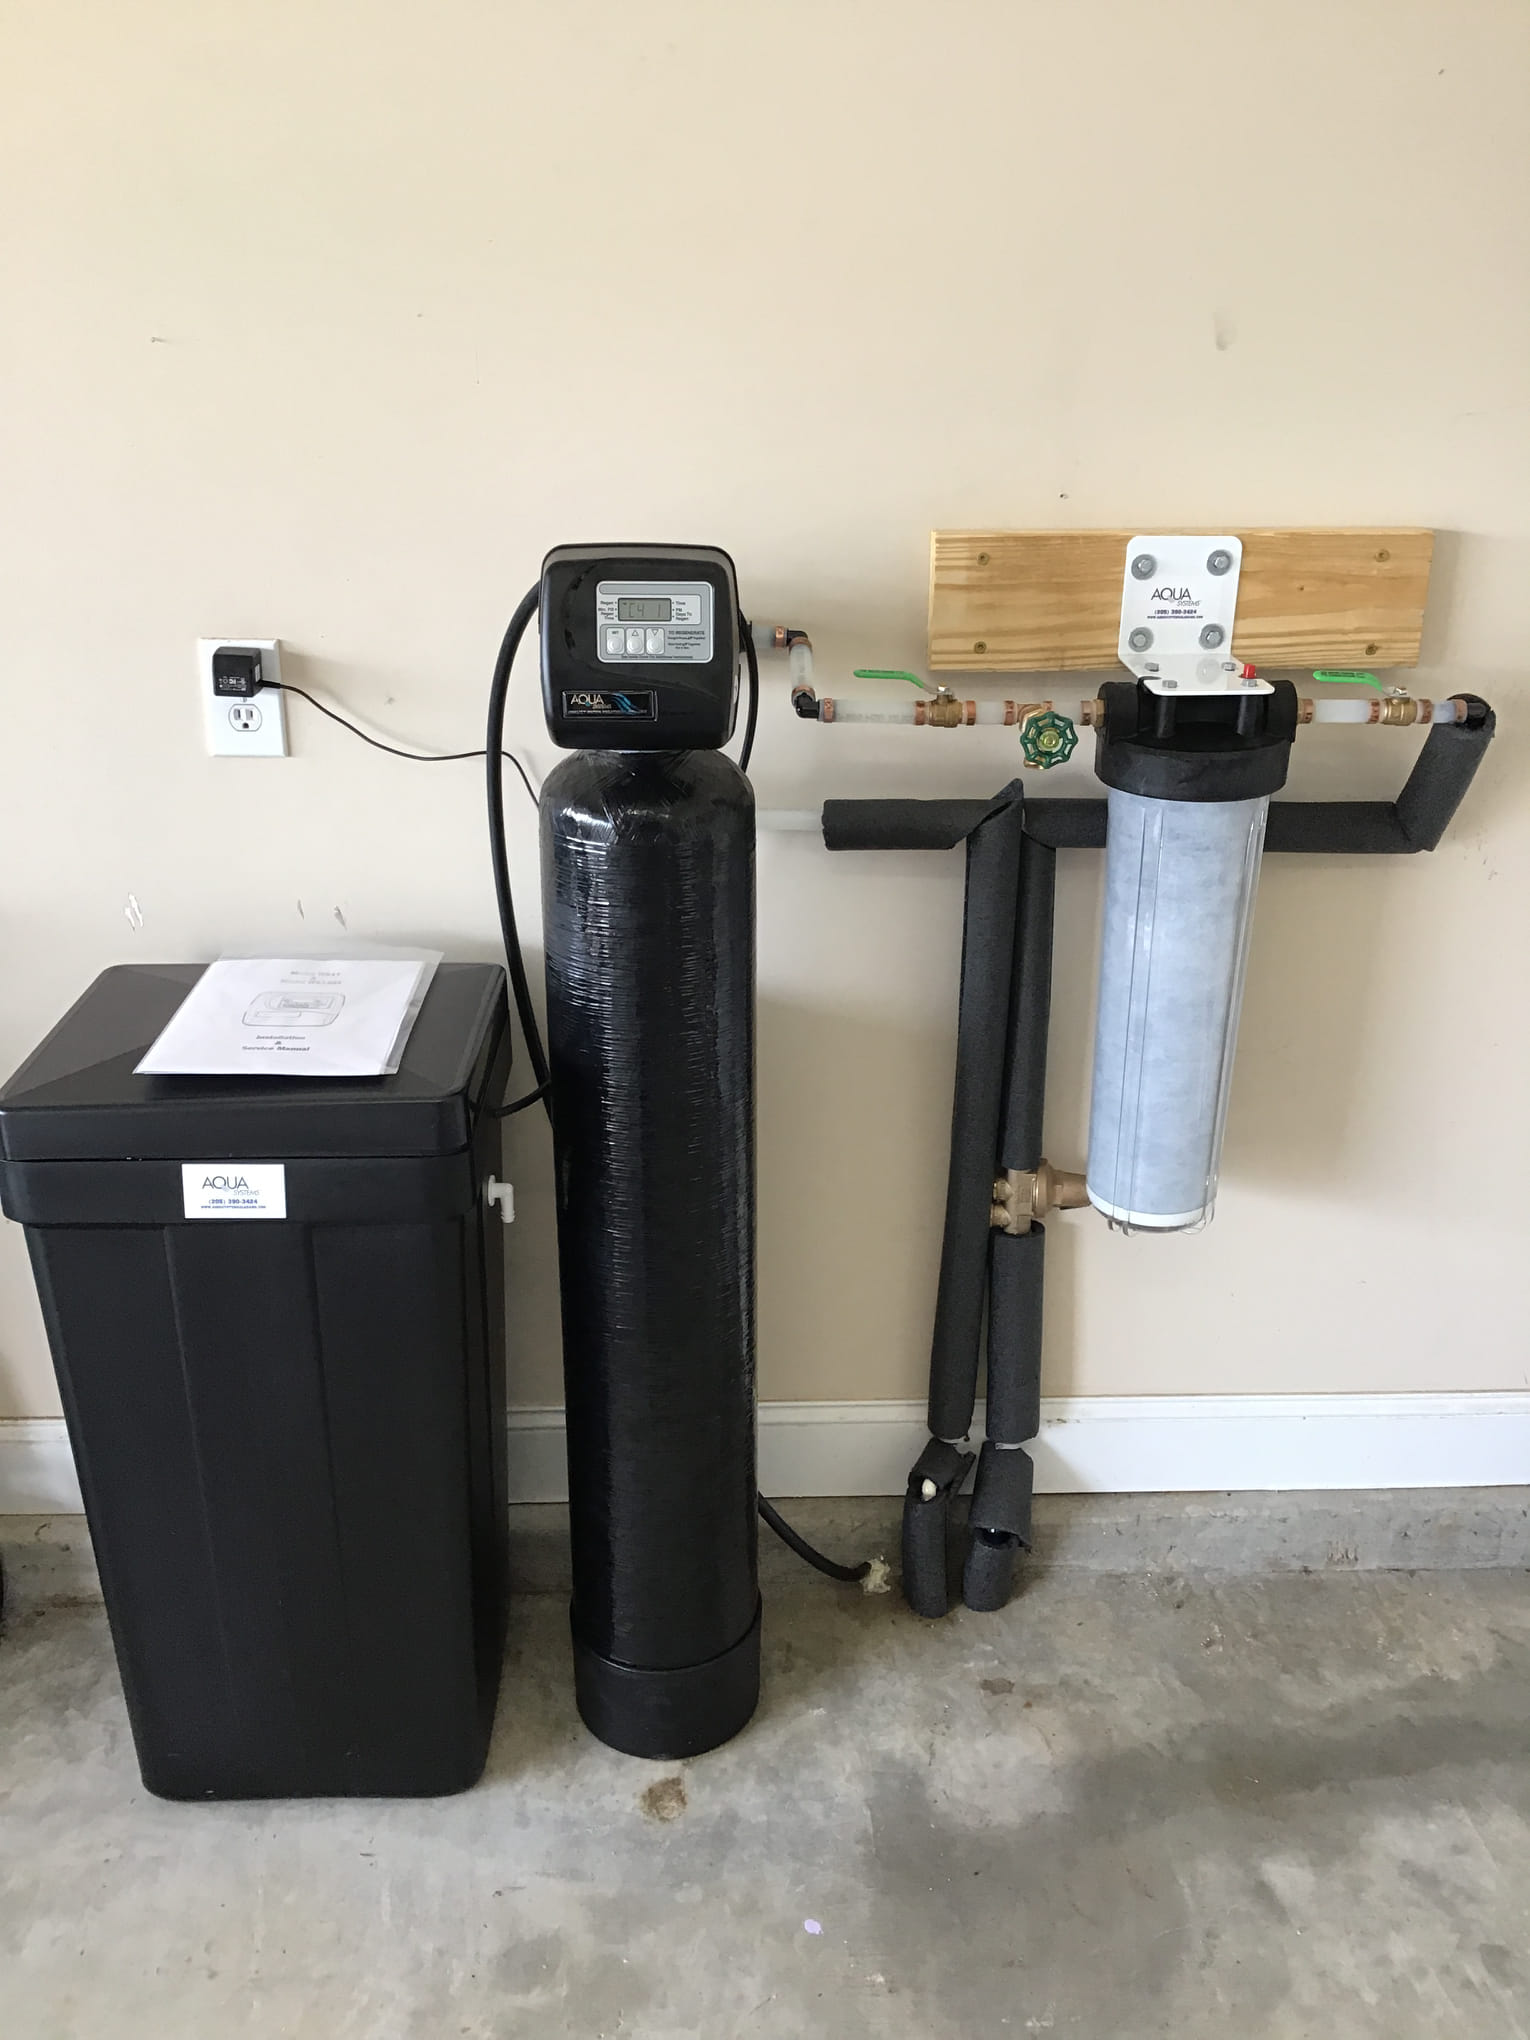 water softener 
hard water
water filtration system
whole home water filter
